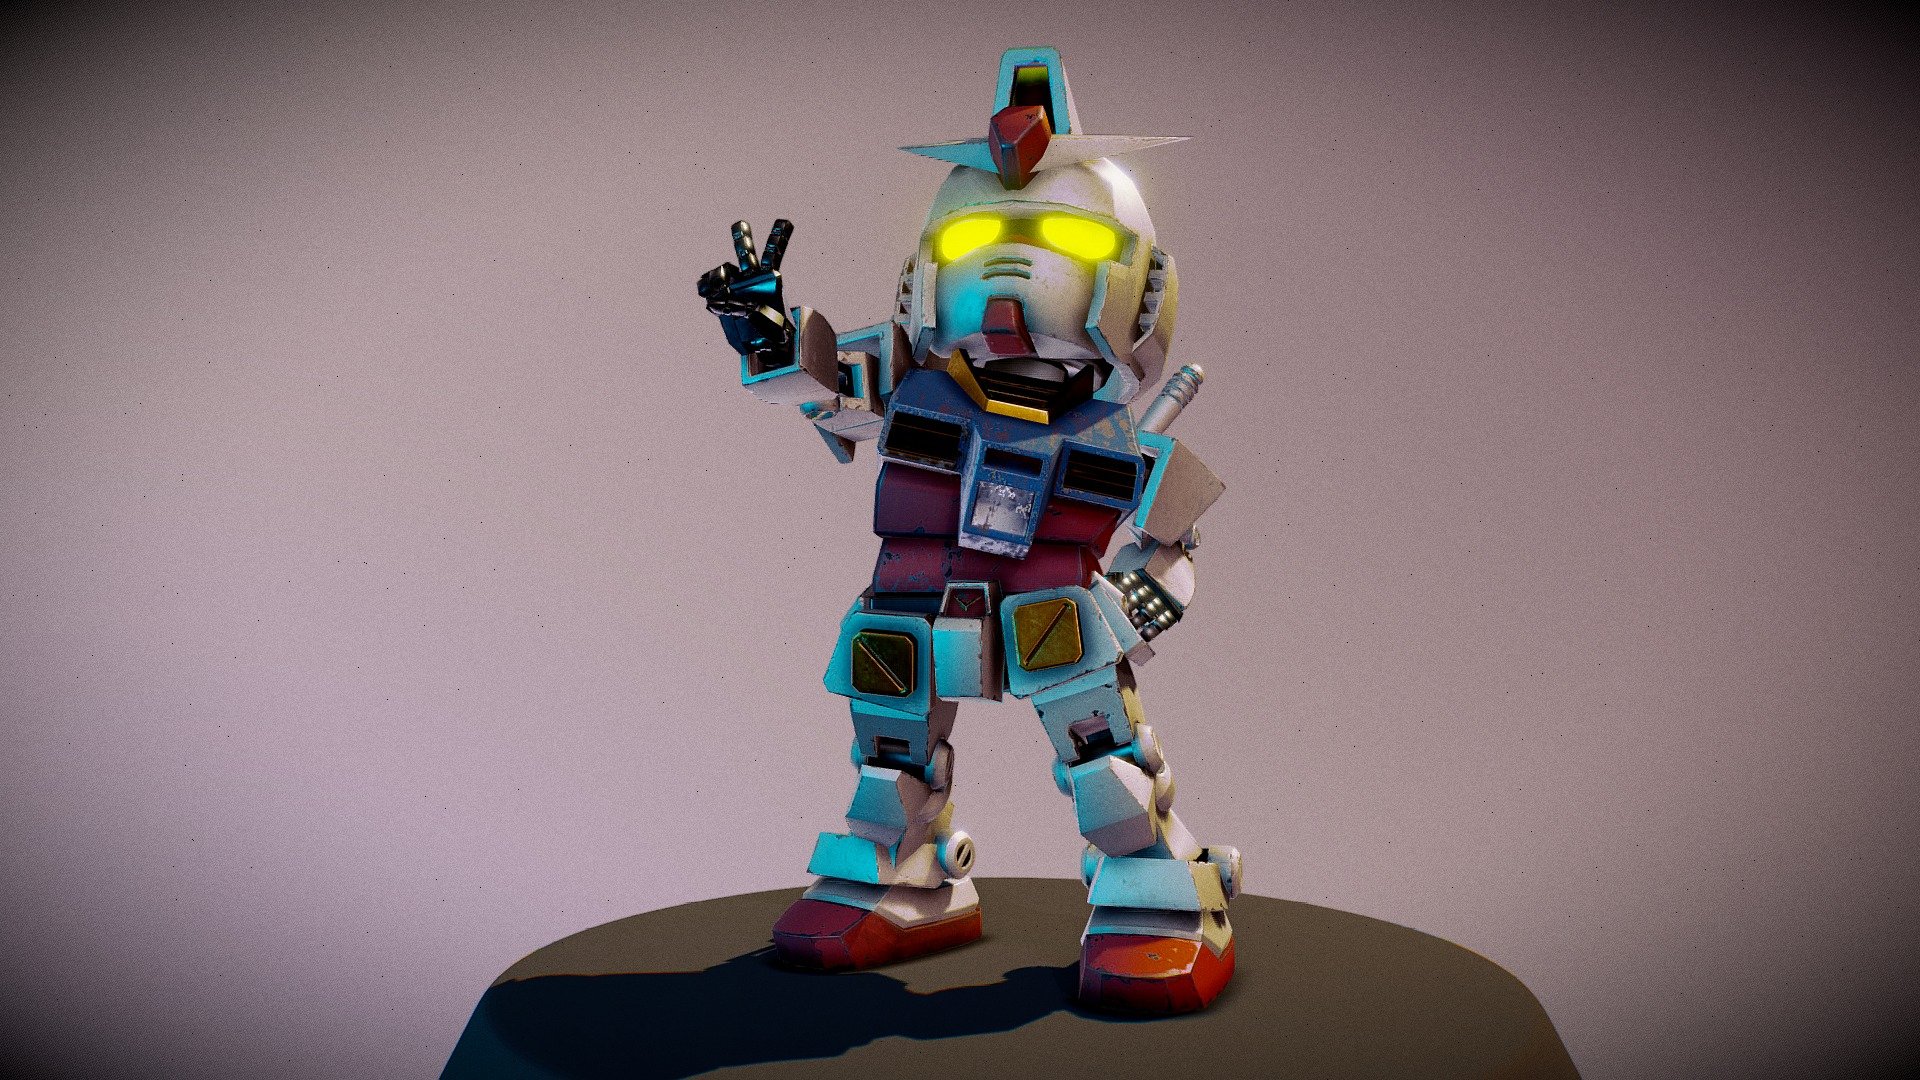 RX78-2 Gundam Fanart from Mobile Suit Gundam.
Couldn't find time to build Gunpla so I've spent about equal amount of time to make this smh.
Made with Blender, Substance Painter - RX78-2 Gundam from Mobile Suit Gundam - Download Free 3D model by teejlesdoodles 3d model